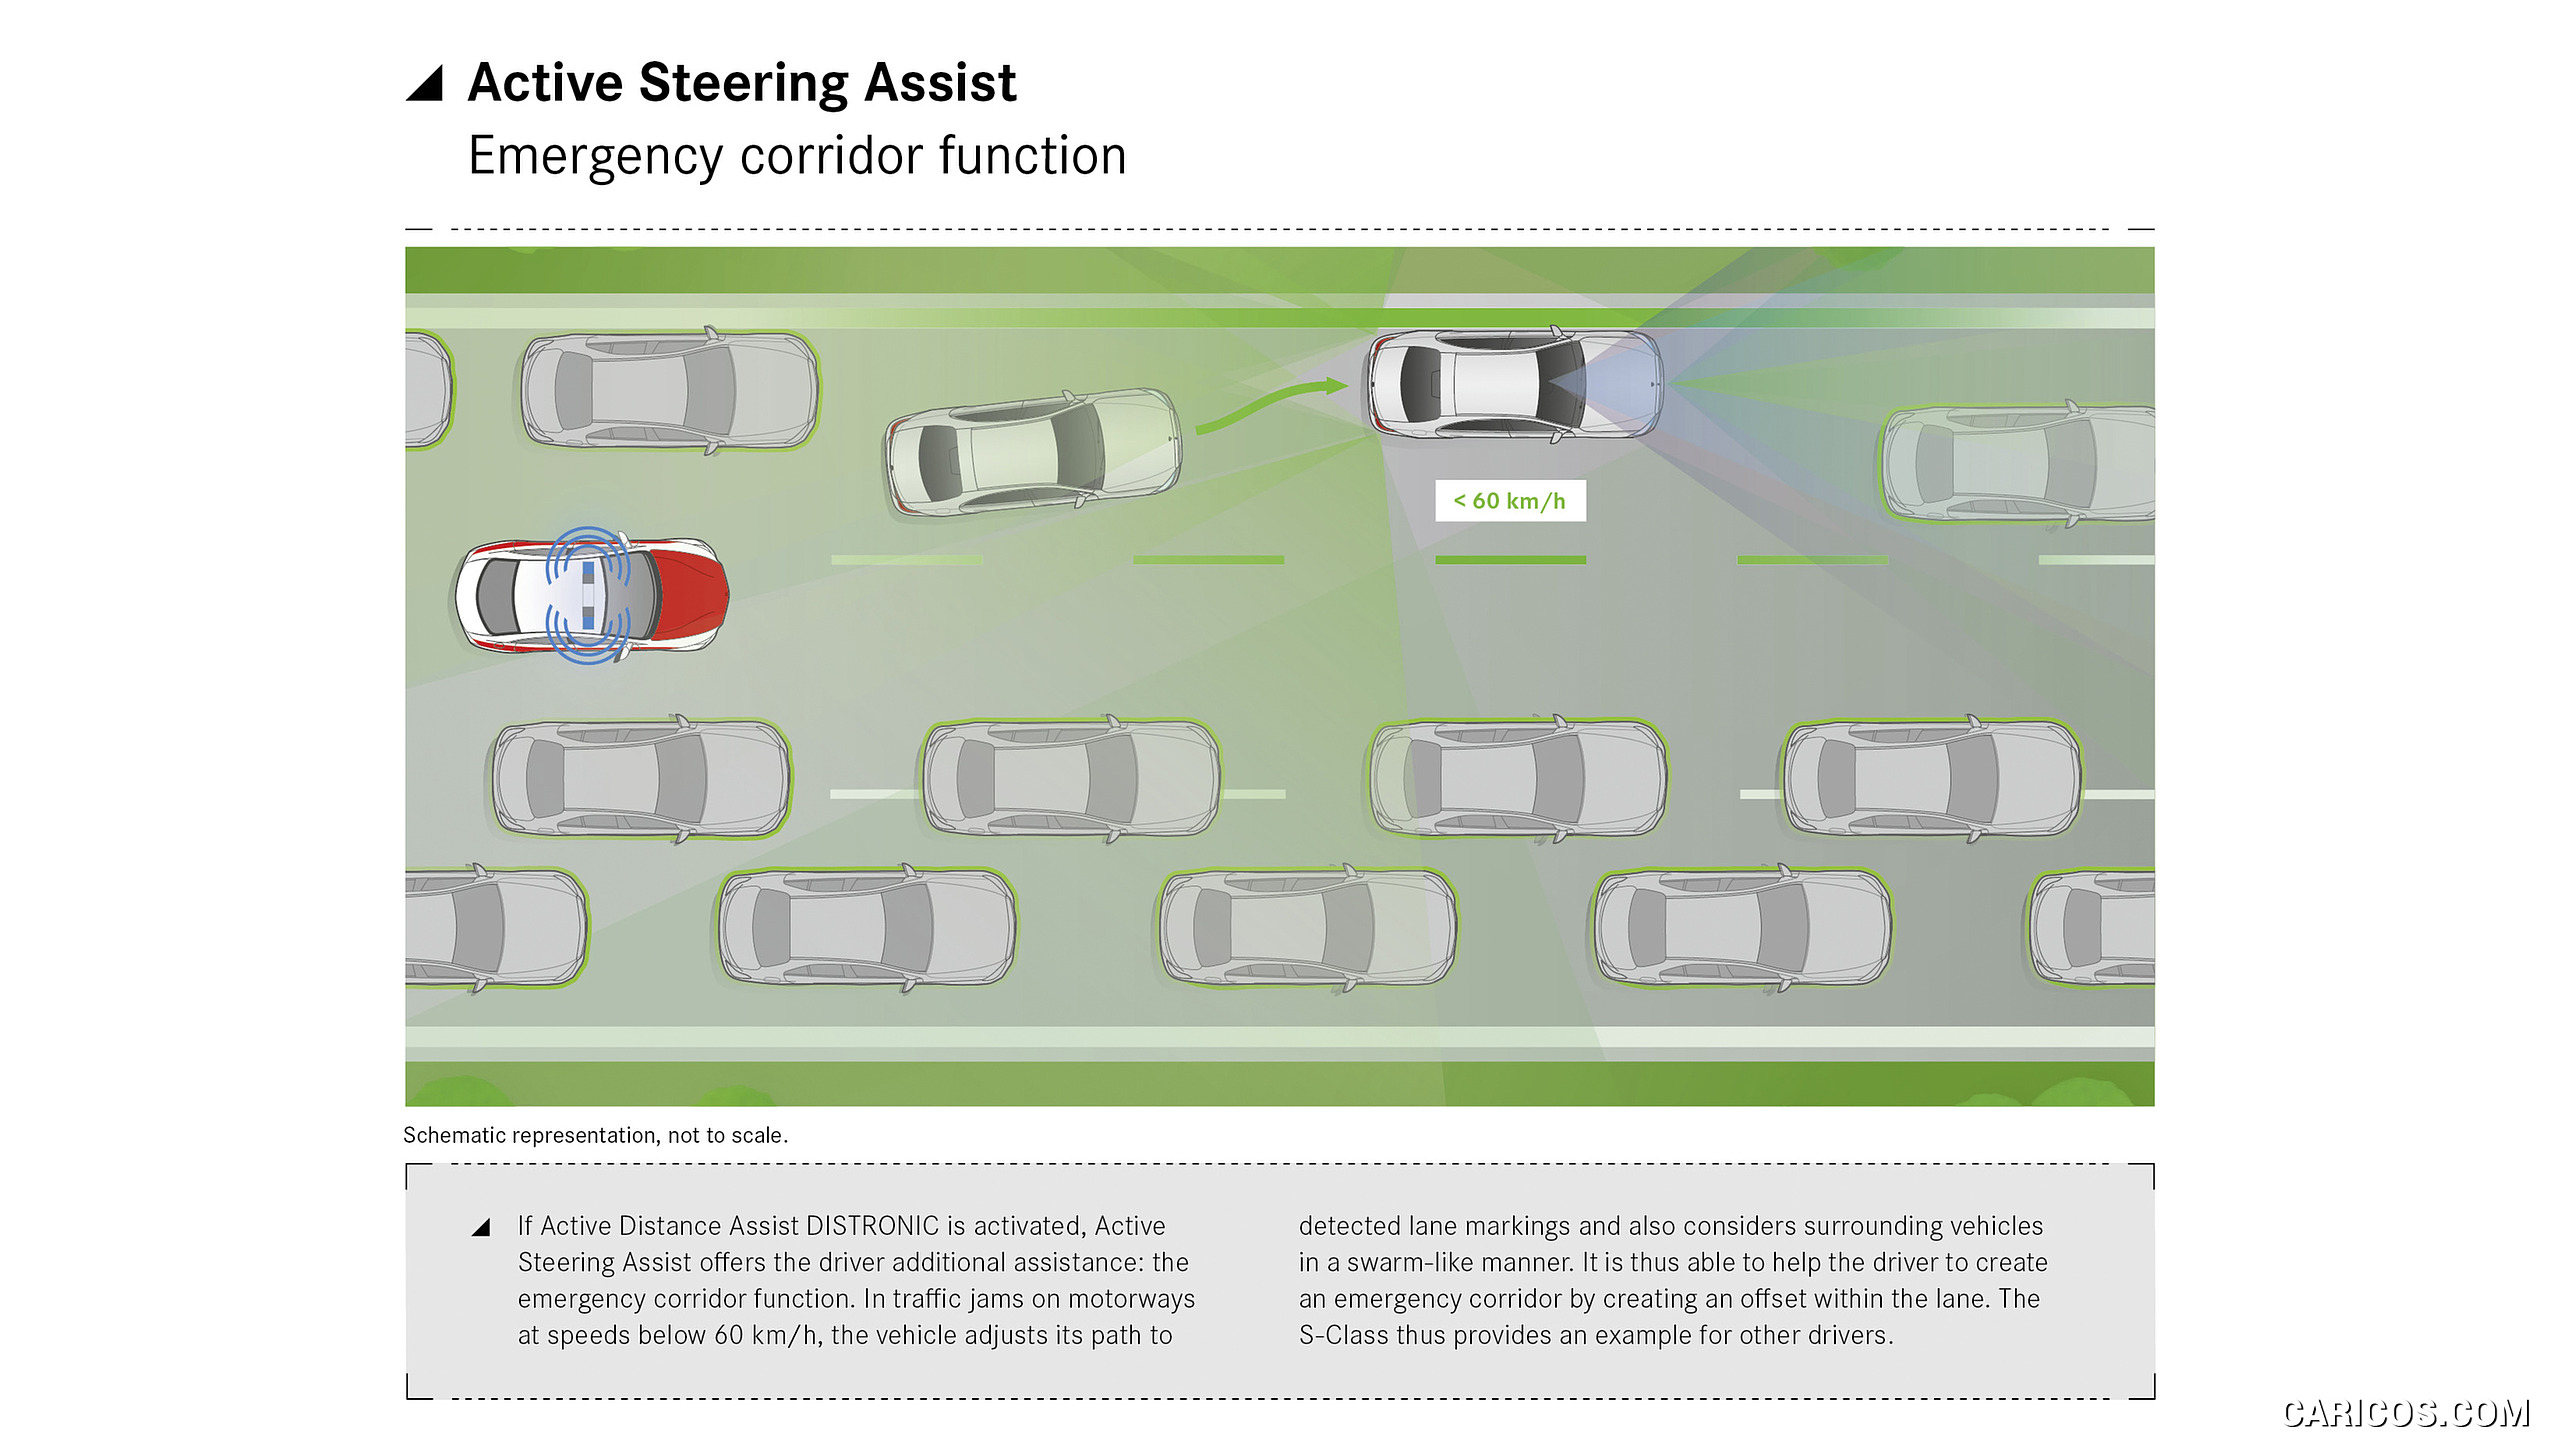 2021 Mercedes-Benz S-Class - Driving assistance system: The Active Steering Assist, #196 of 316